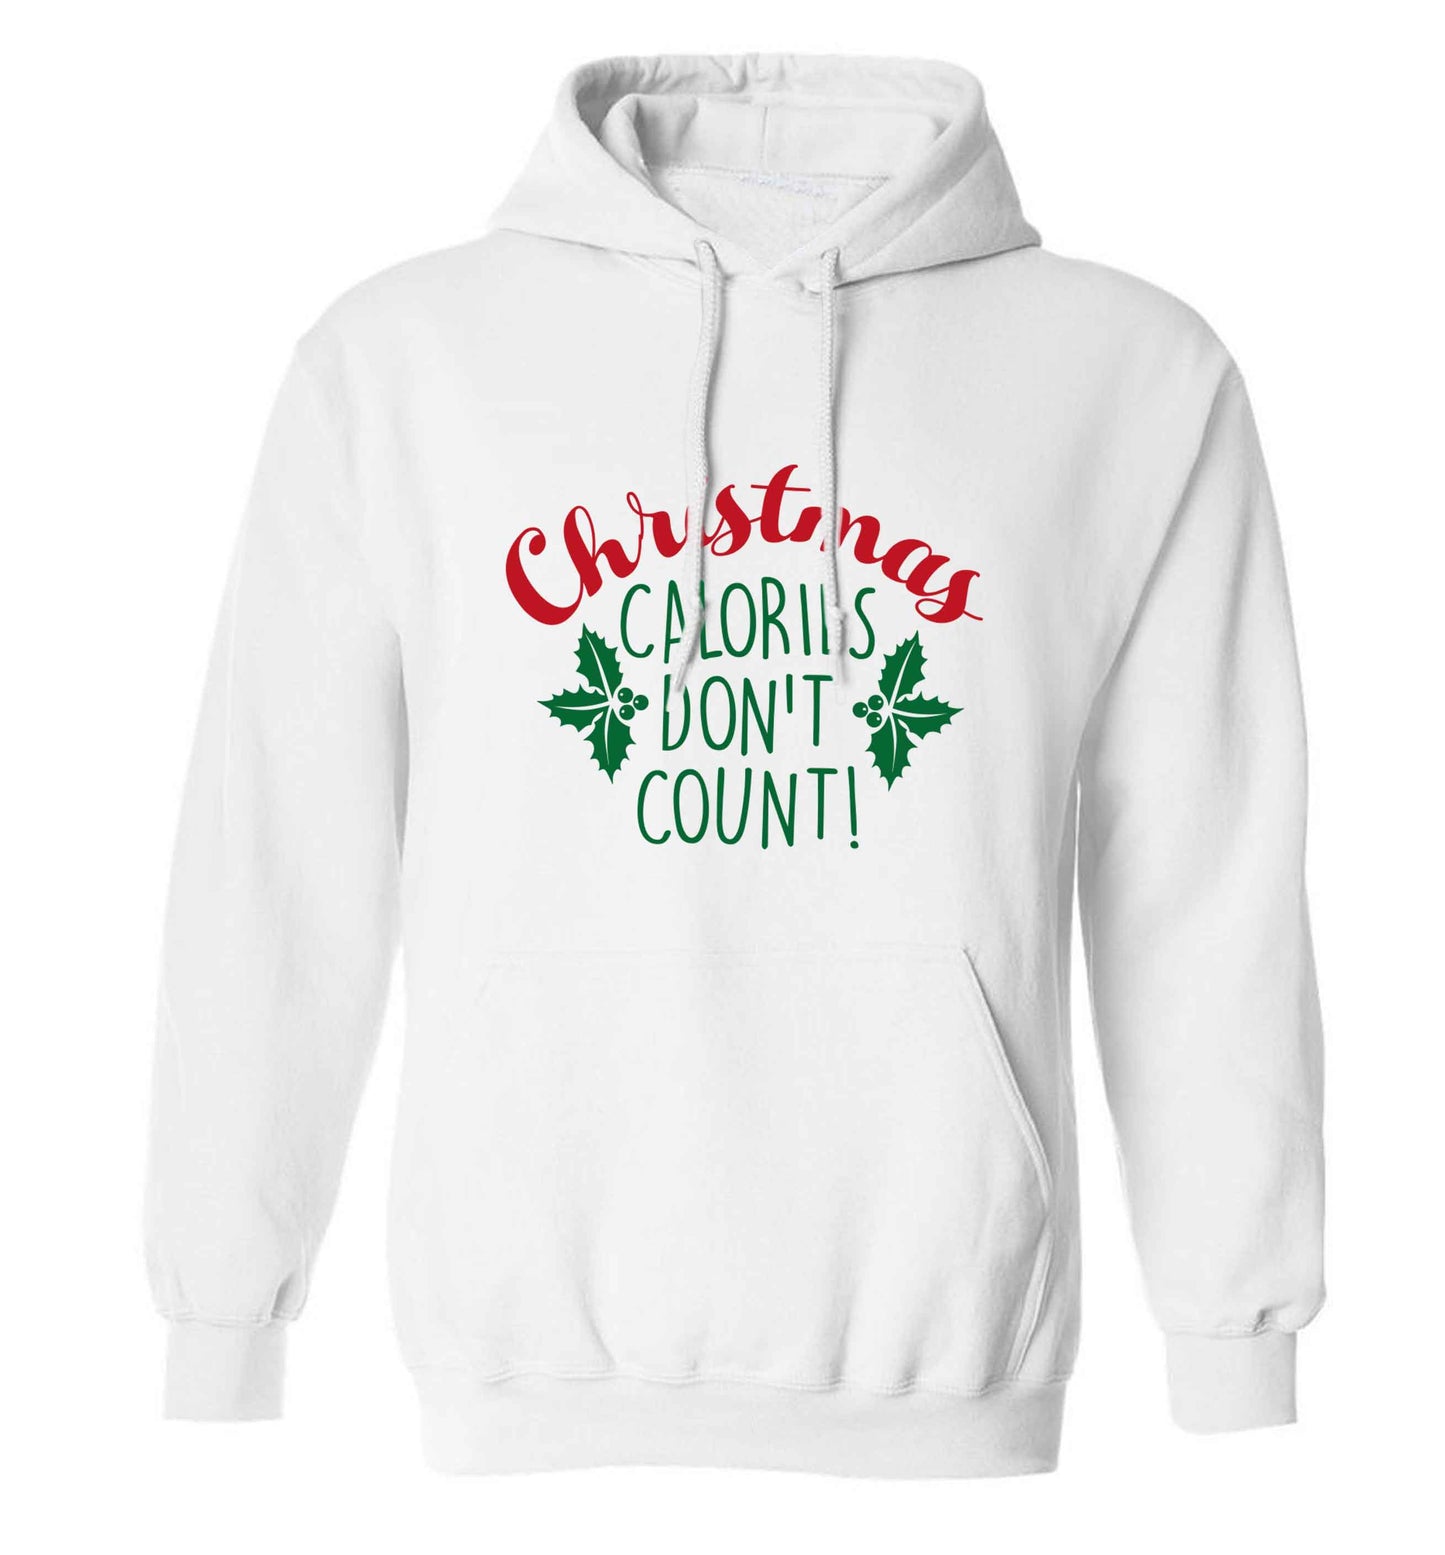 Christmas calories don't count adults unisex white hoodie 2XL